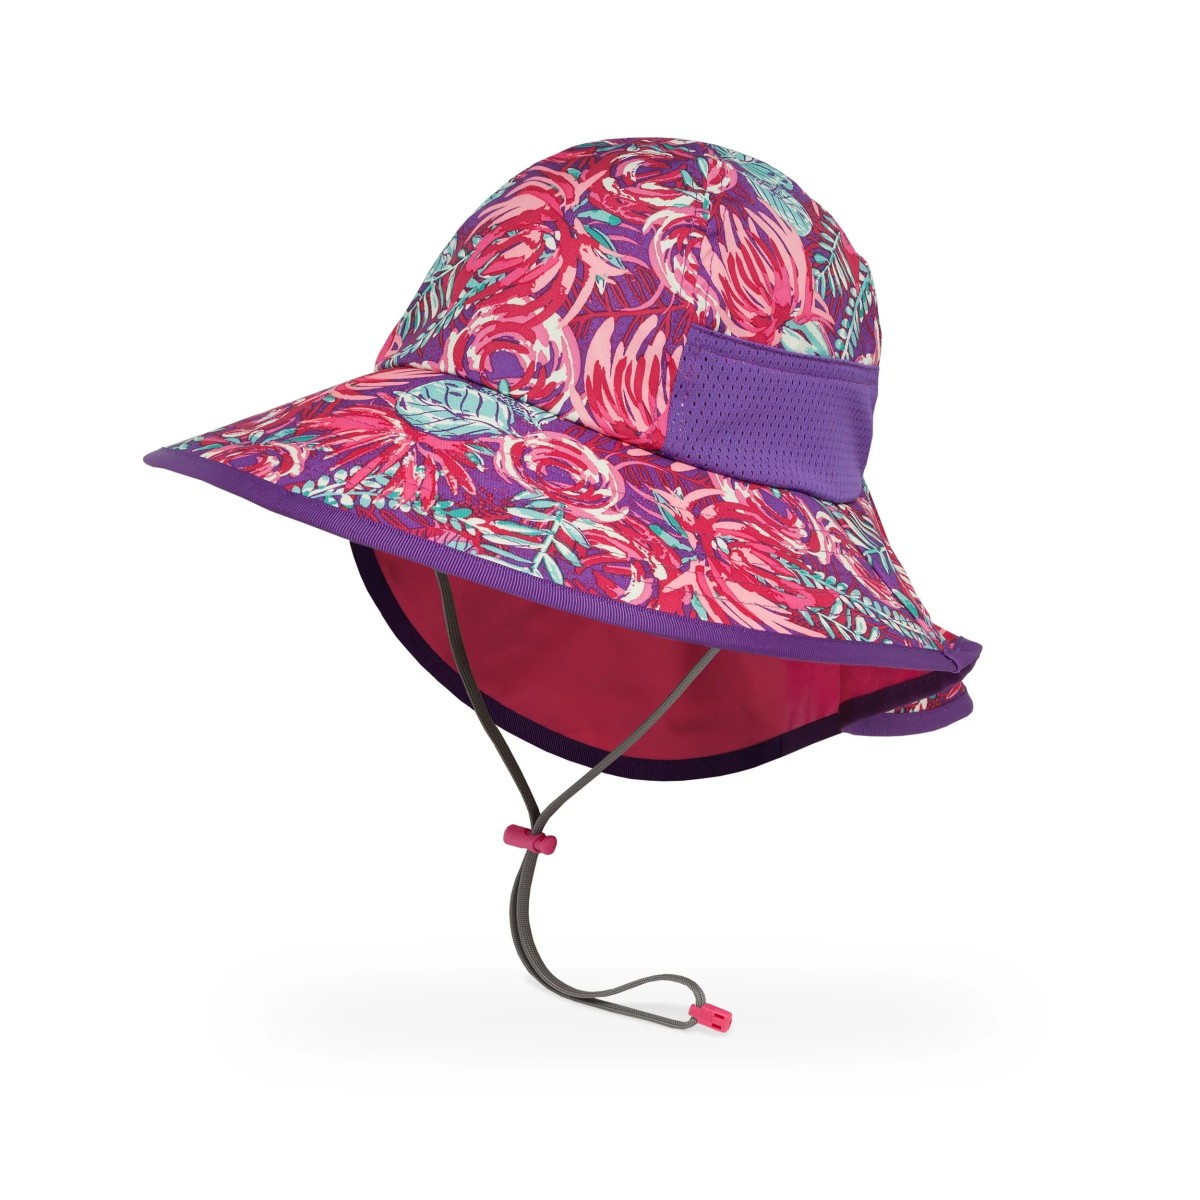 sunday afternoons kids' play hat sun hat review